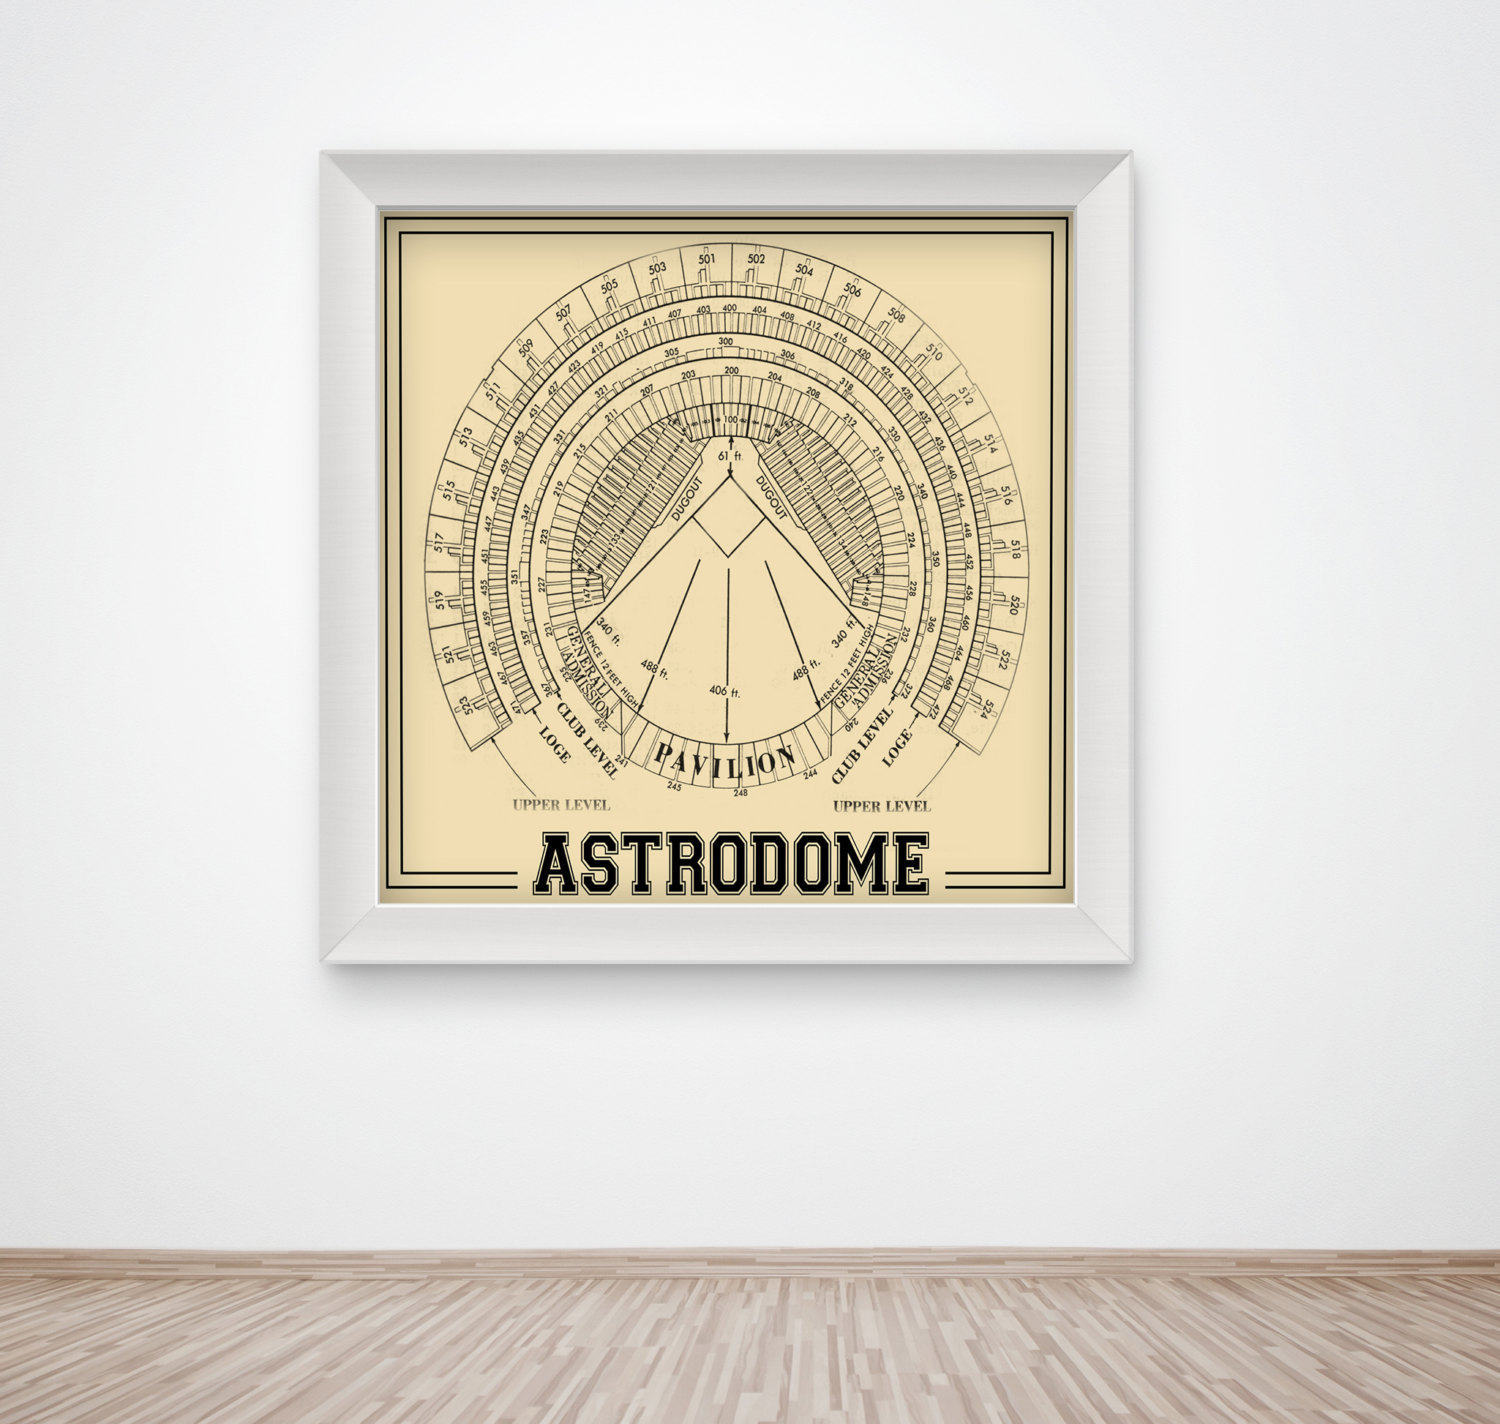 Astrodome Seating Chart